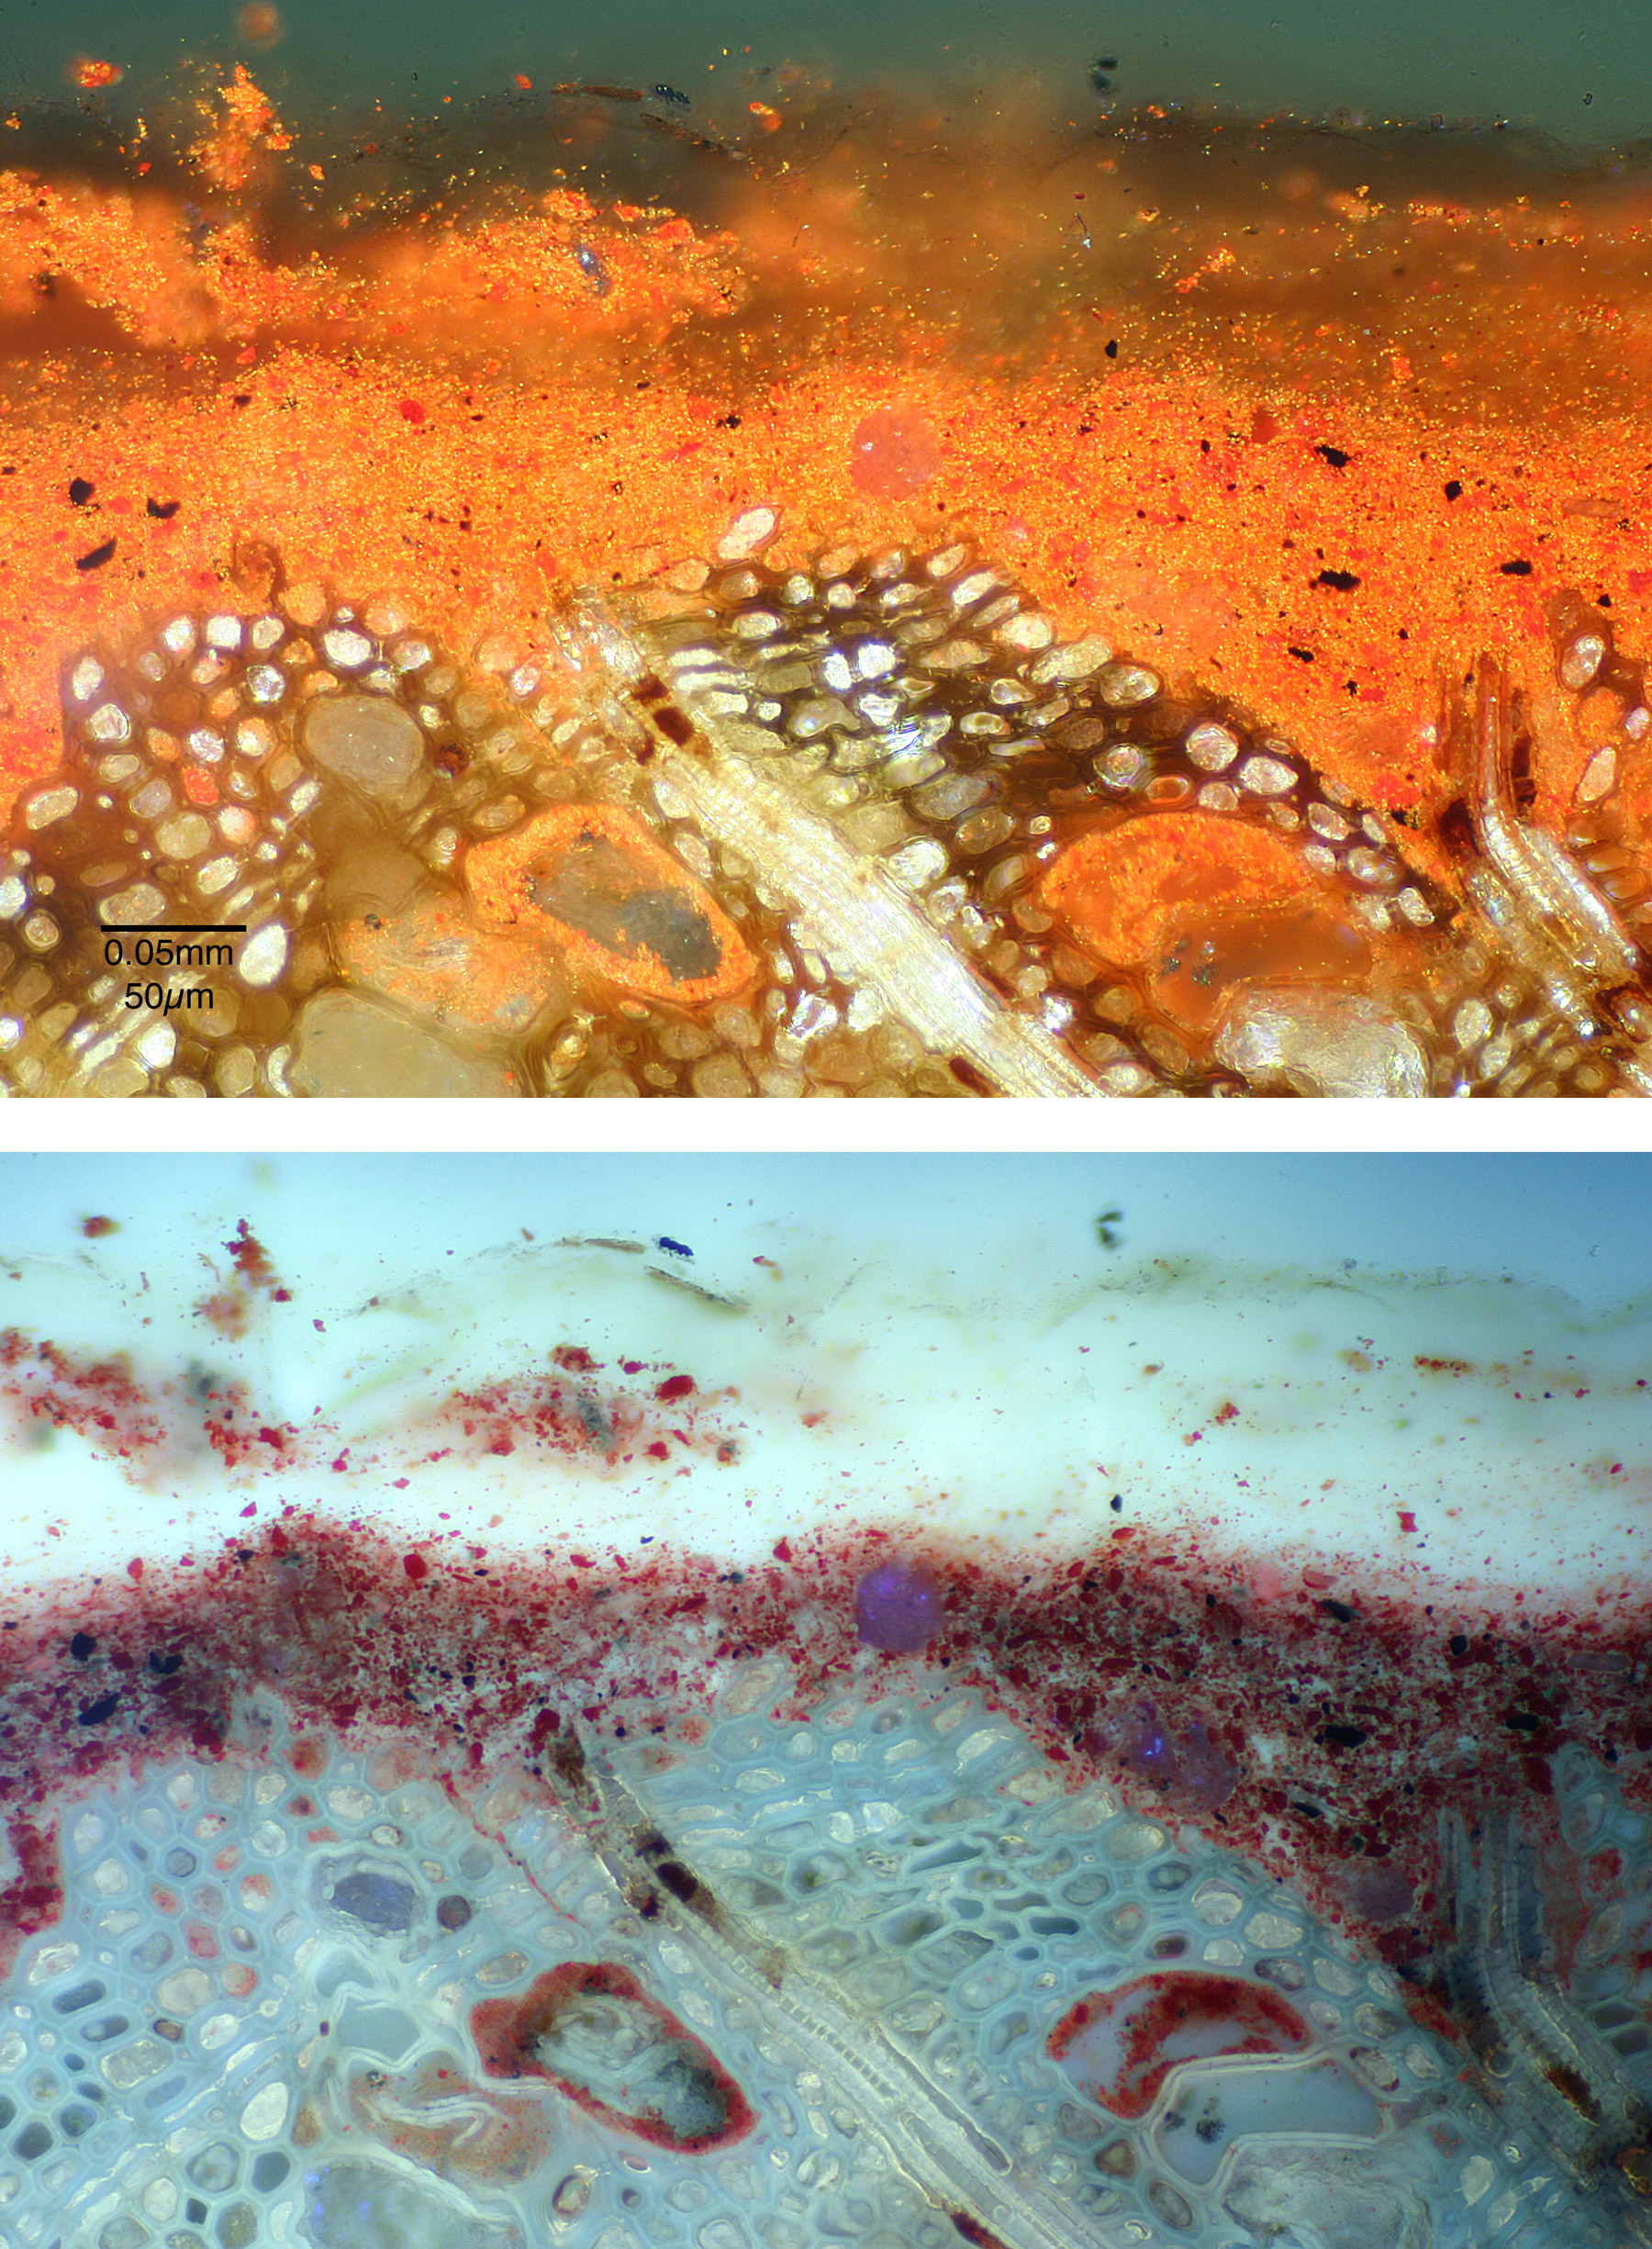 two cross-section photomicrographs revealing the multi-layer structure of the varnish; the top shows the lacquer in luminous shades of orange and gold under visible light, the bottom in shades of blue, red, purple, and white under UV light